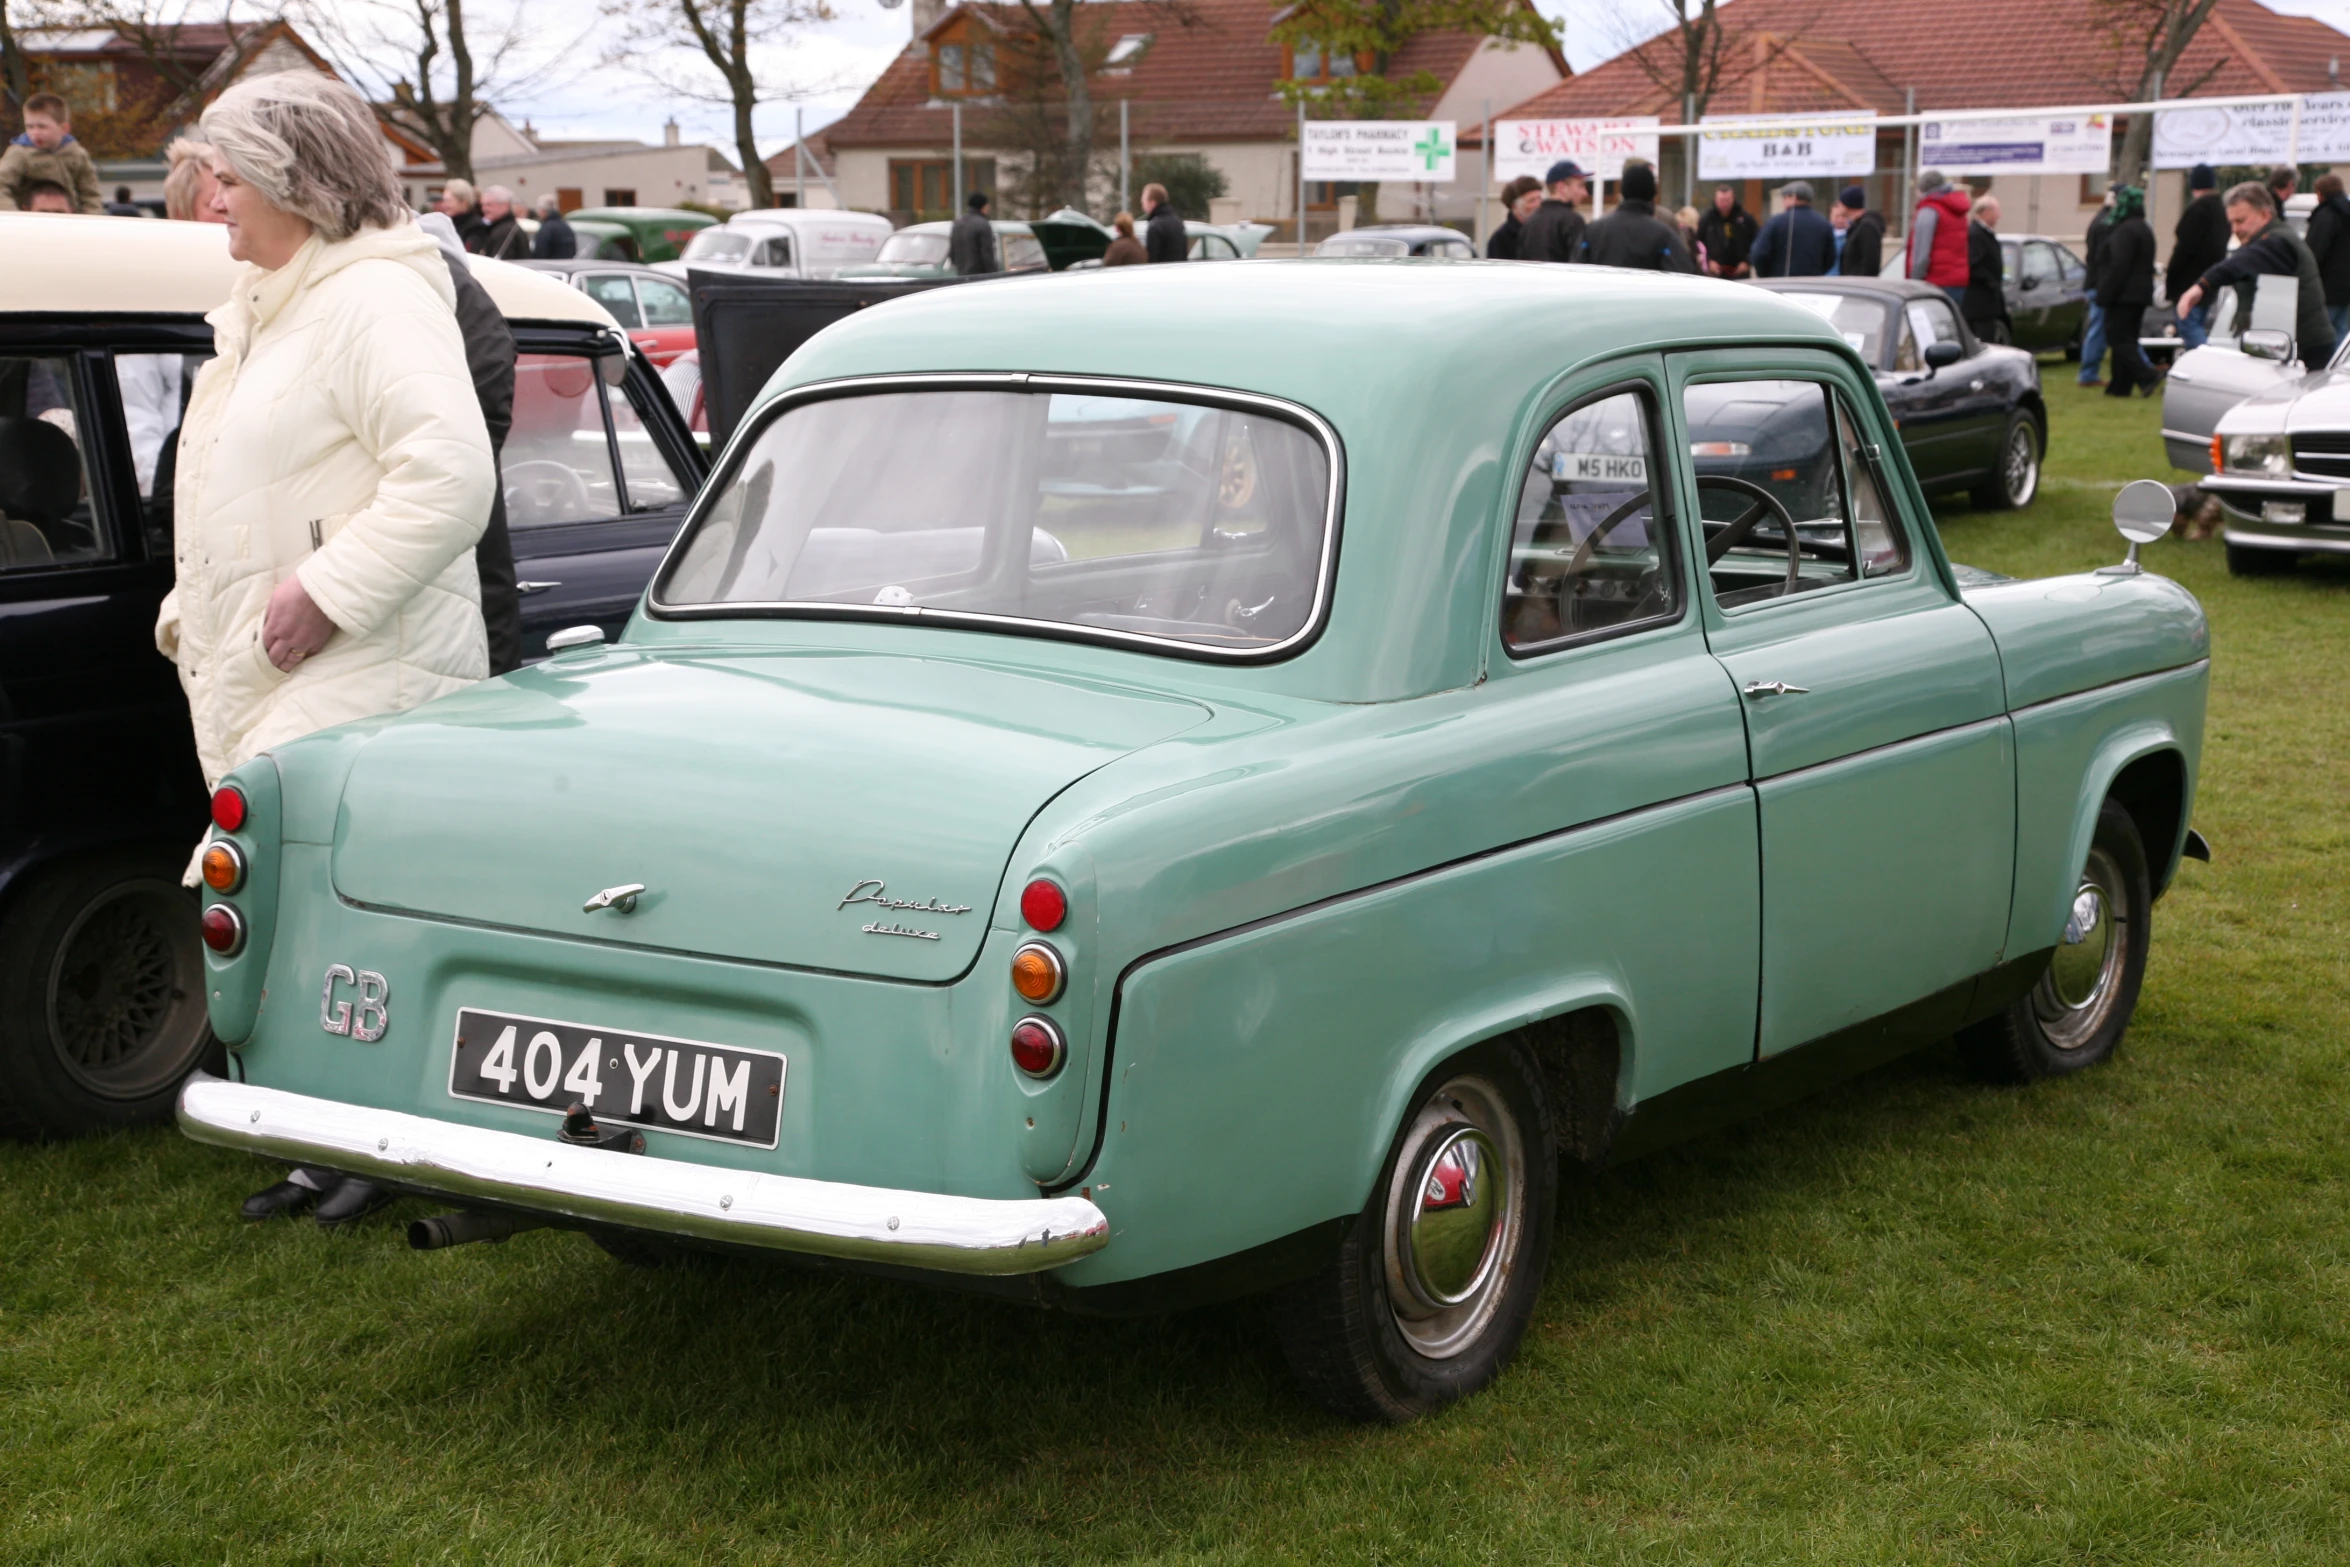 two old fashion cars on display at an event